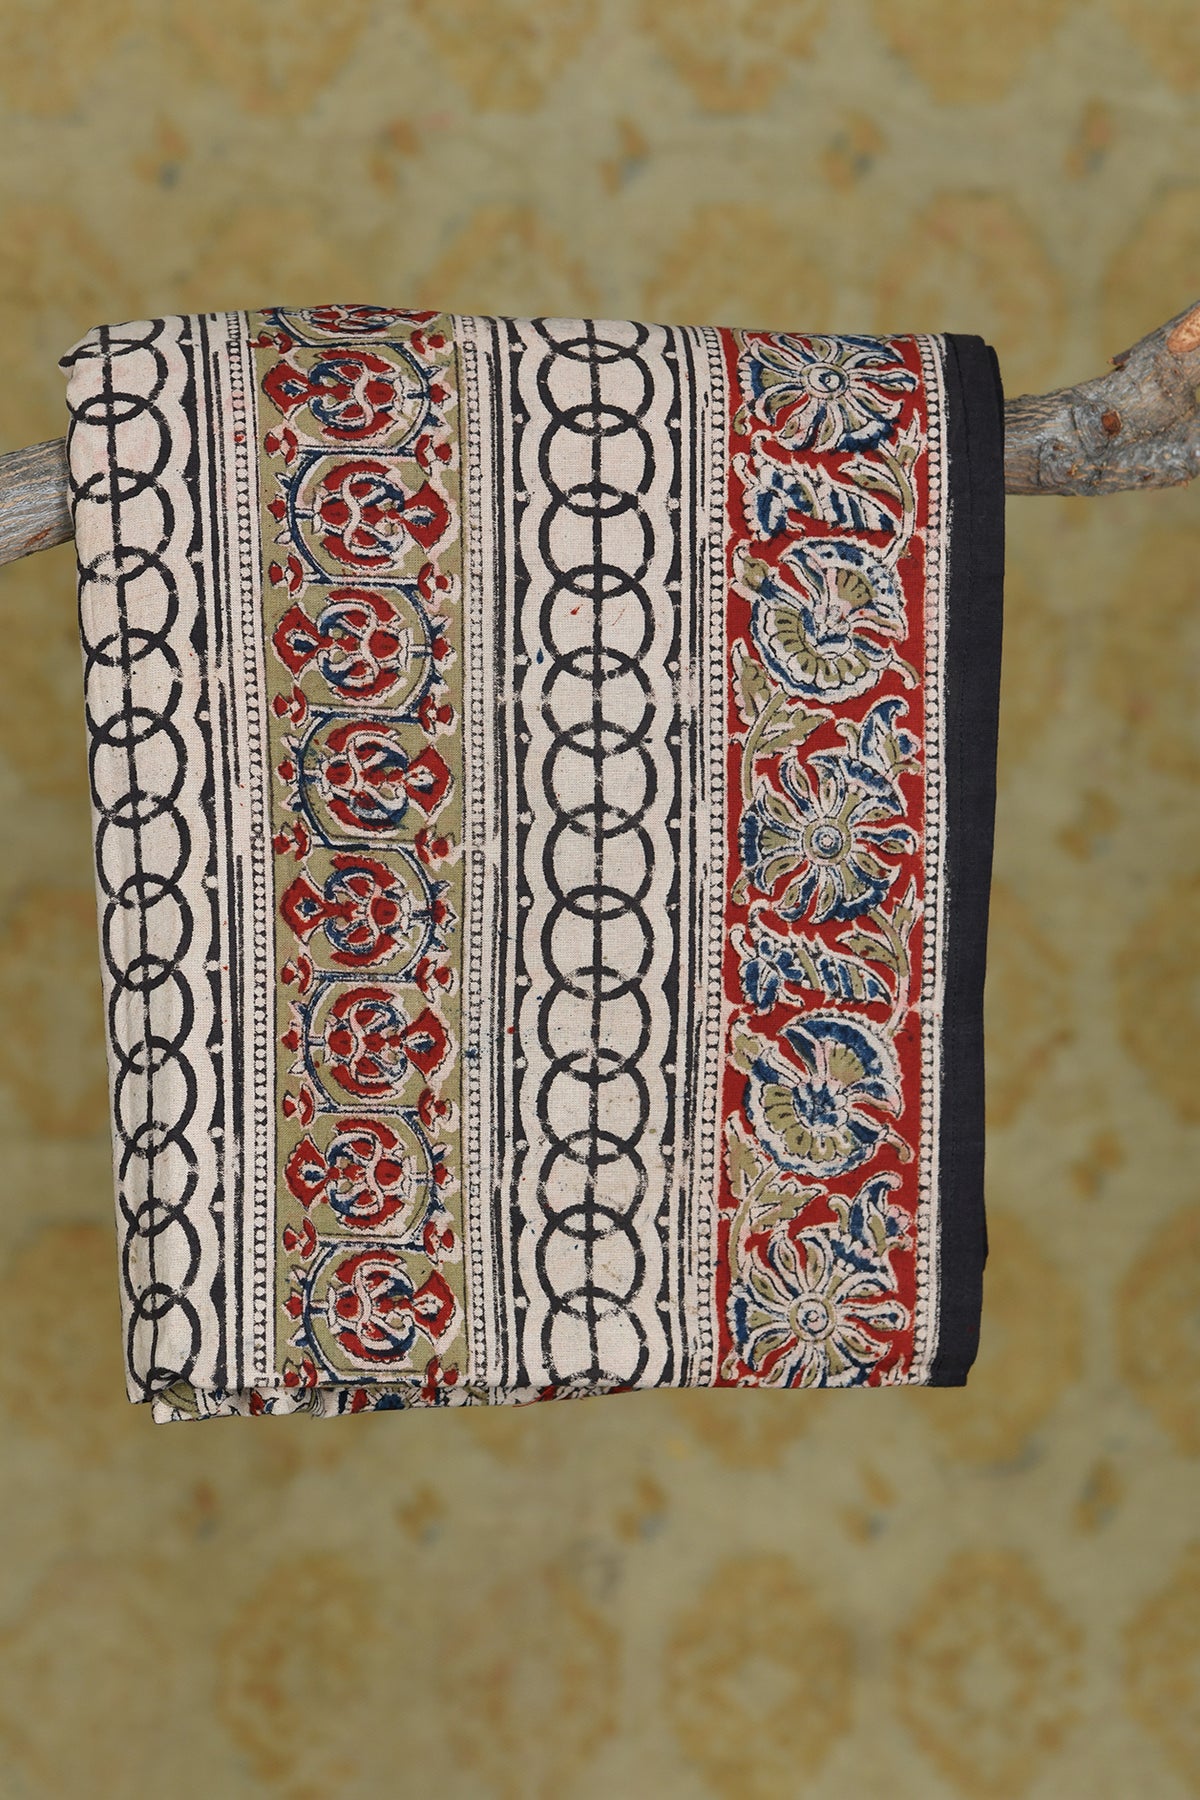 Off White With Rust Red And Black Kalamkari Printed Pure Cotton Double Bedspread